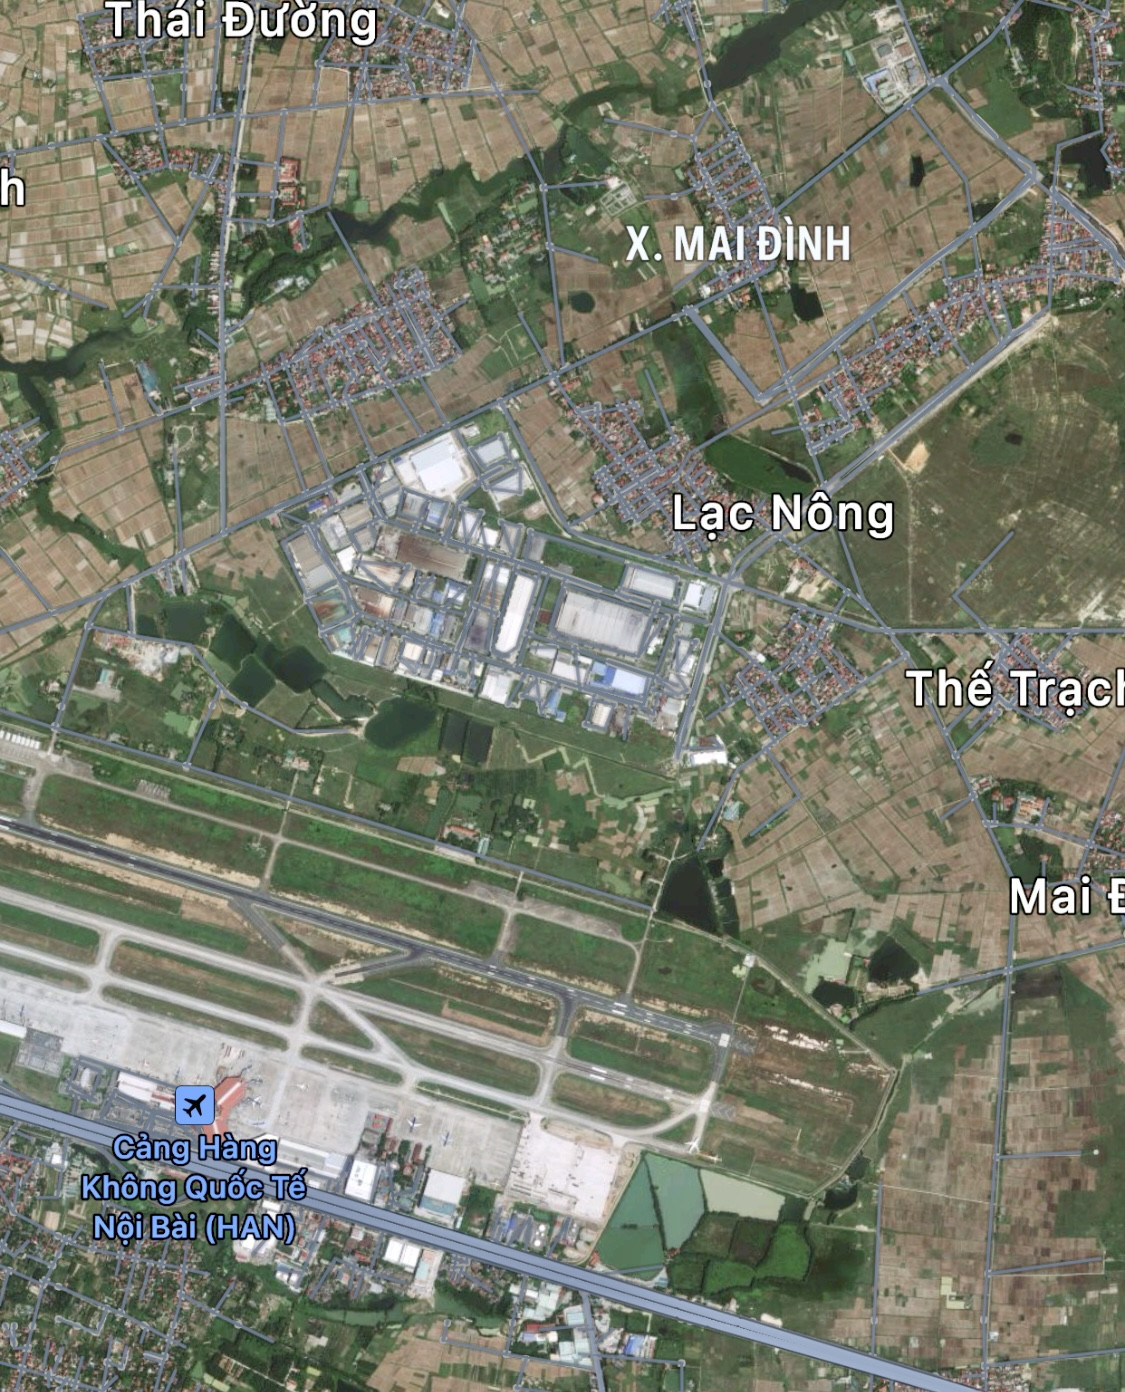 1,200 sq m of land near Noi Bai Airport to be put up for auction in October